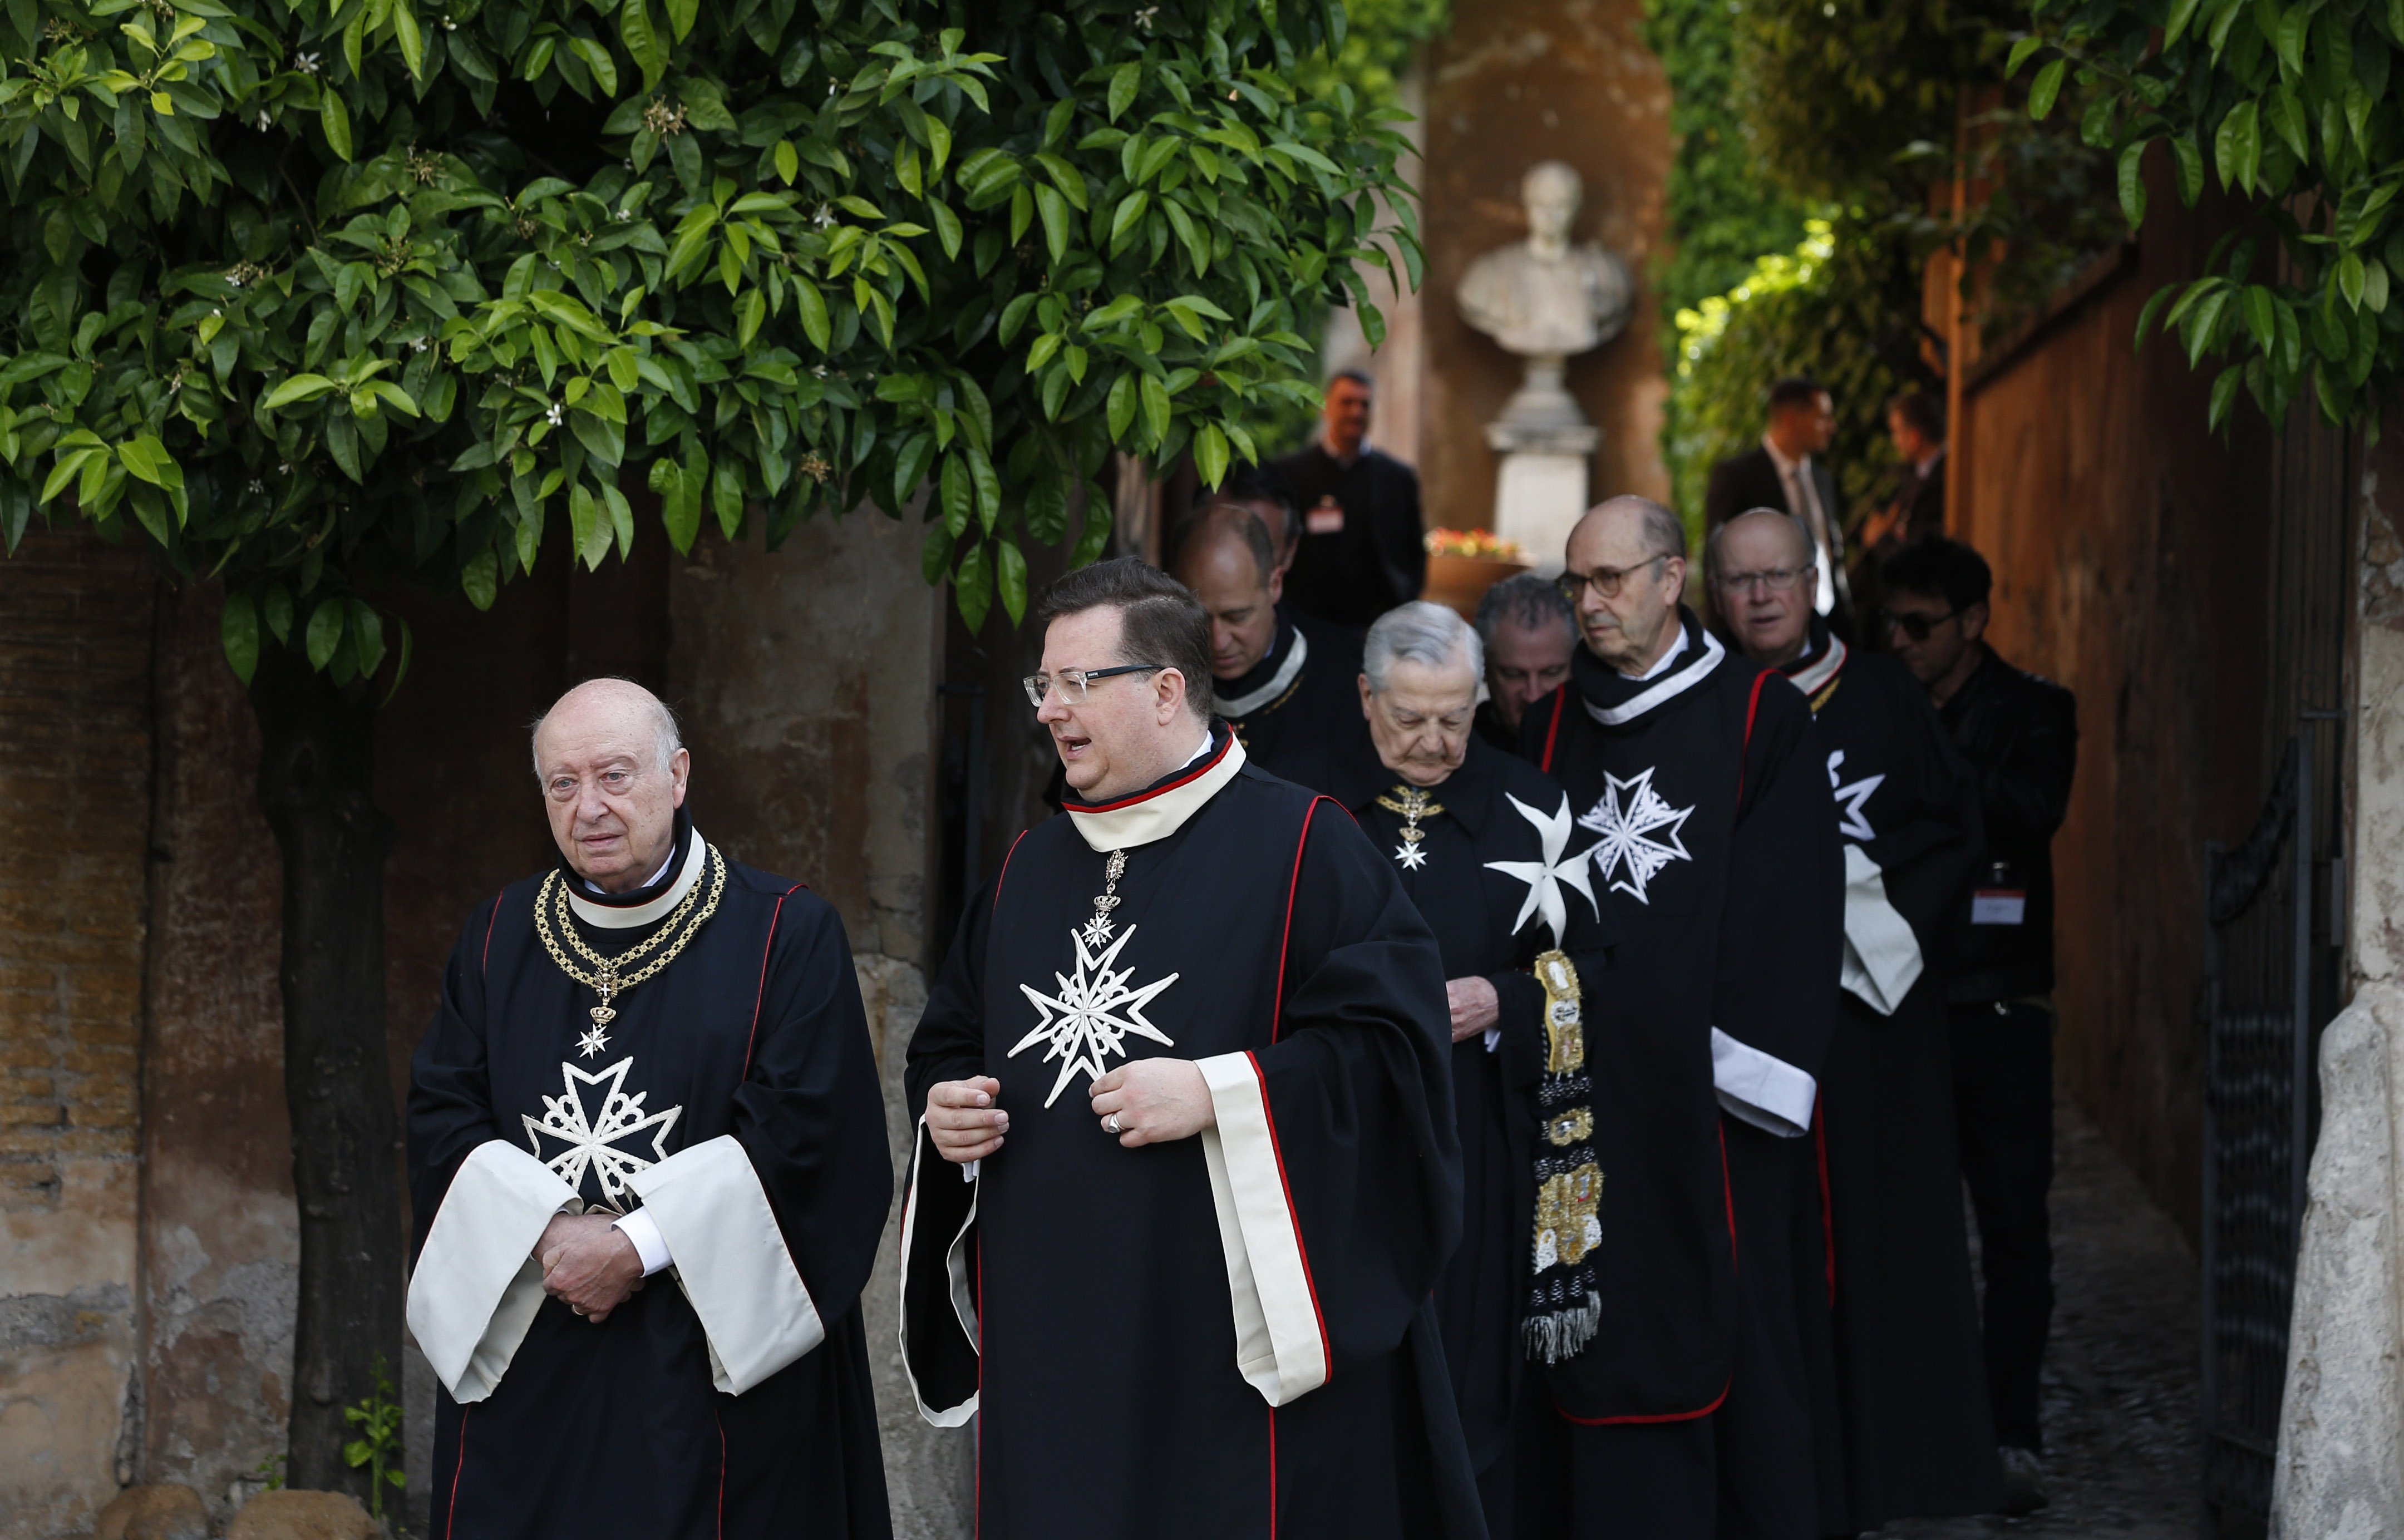 Members of the Knights of Malta walk in a procession at the start of voting to elect a new leader in Rome in this May 2, 2018. (CNS photo/Paul Haring)